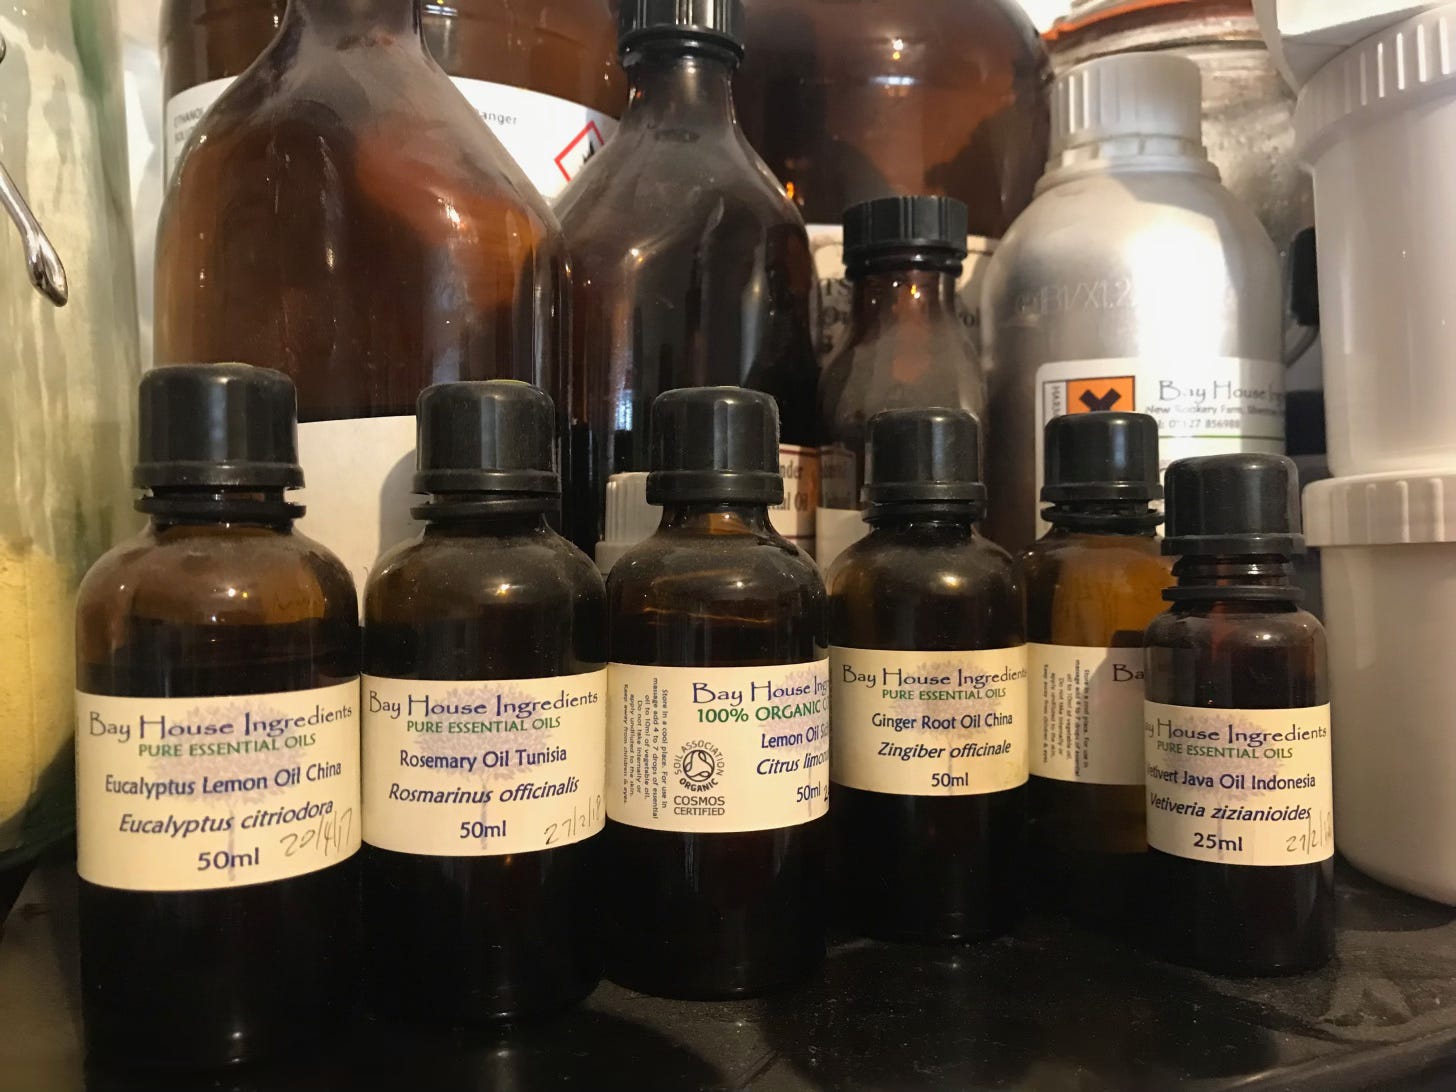 A selection of brown bottles containing essential oils